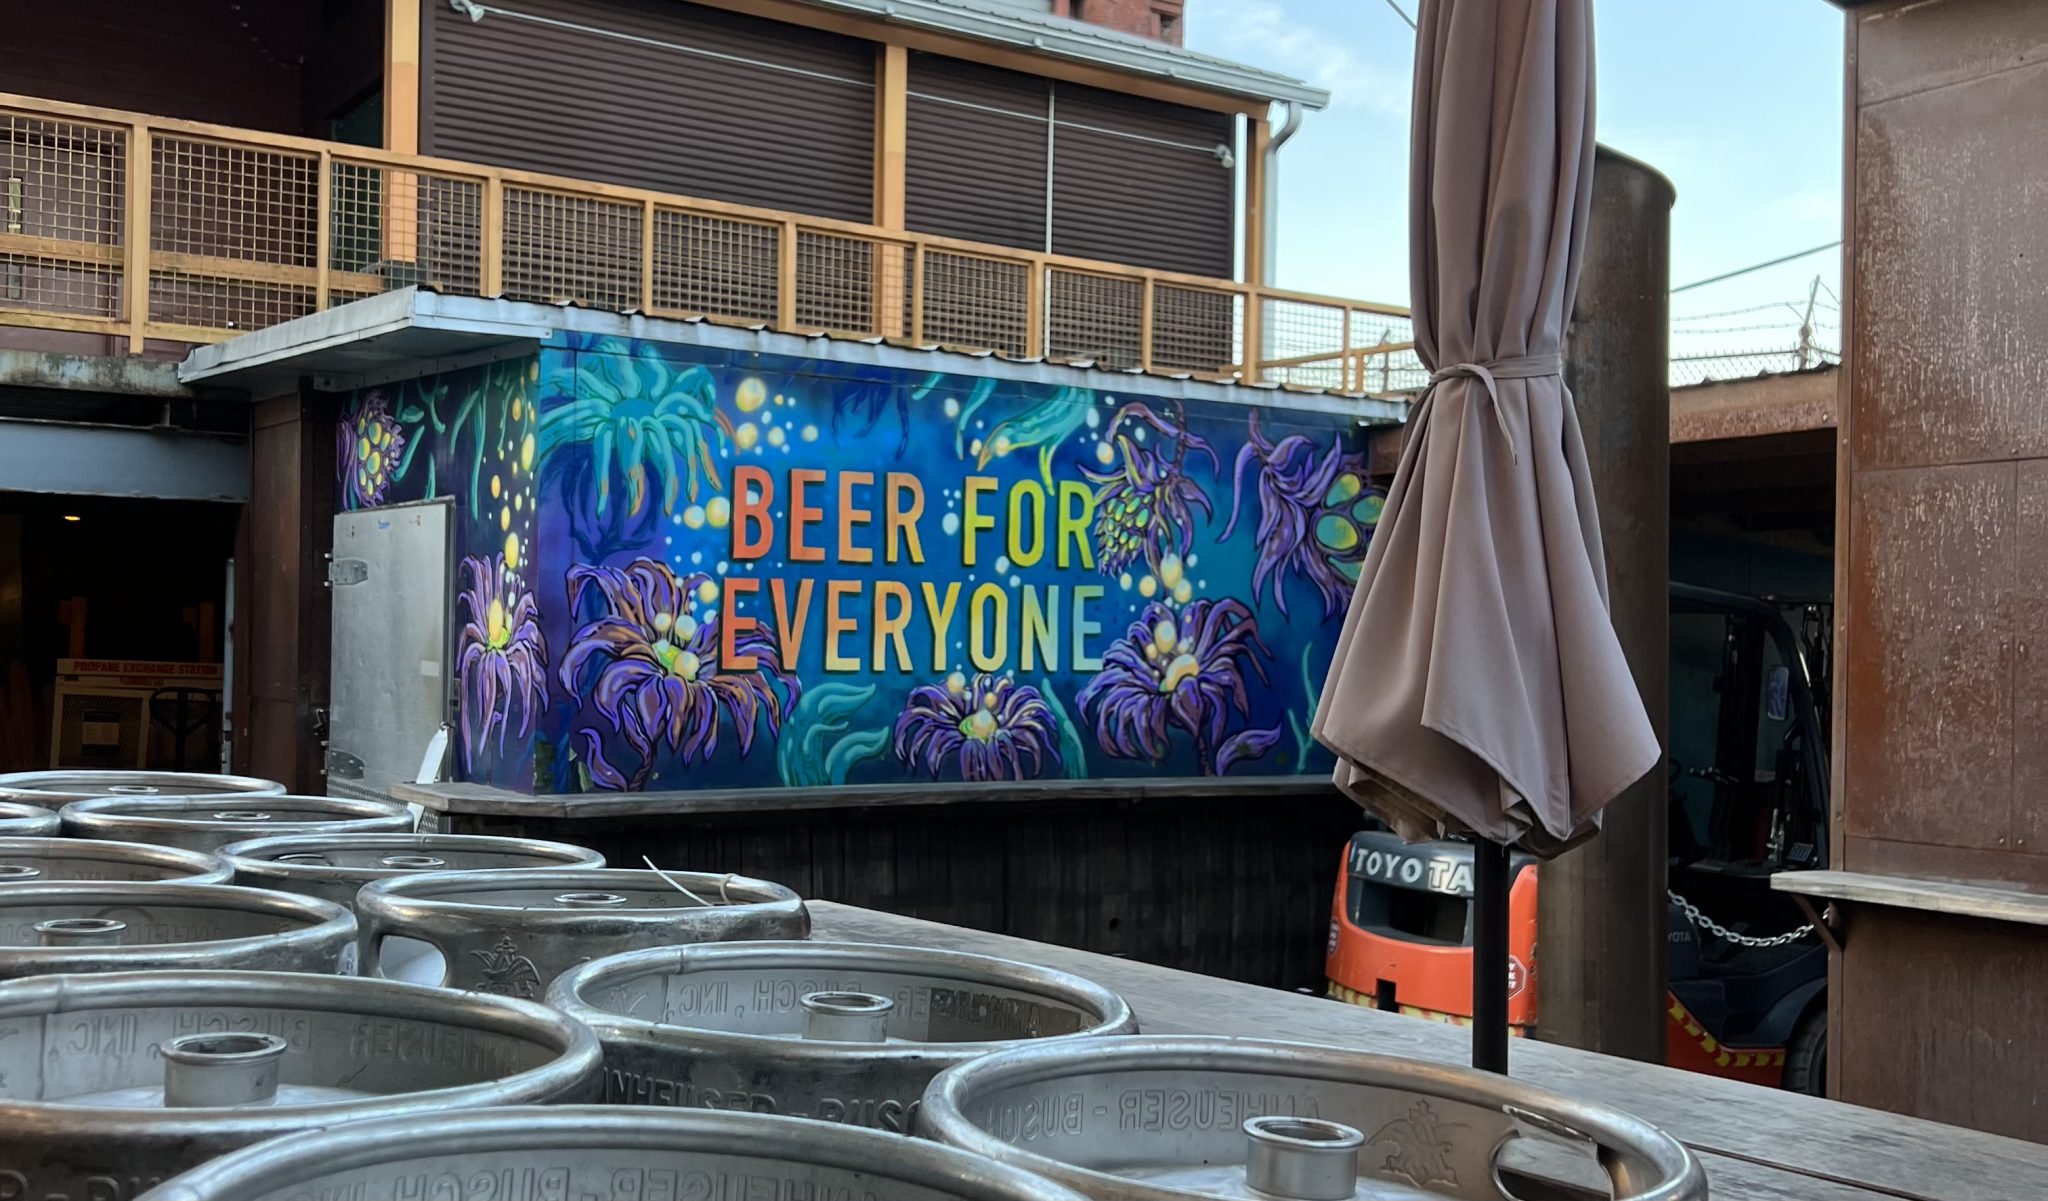 a blue mural with purple flowers and some yellow pollen that seems to be glowing has, in all caps, the words "Beer for Everyone". The words are in dark orange and as they move left to right, become yellow and then blue. There are kegs in the foreground as well as a closed tan umbrella. In the background is a building with a wooden balcony. 